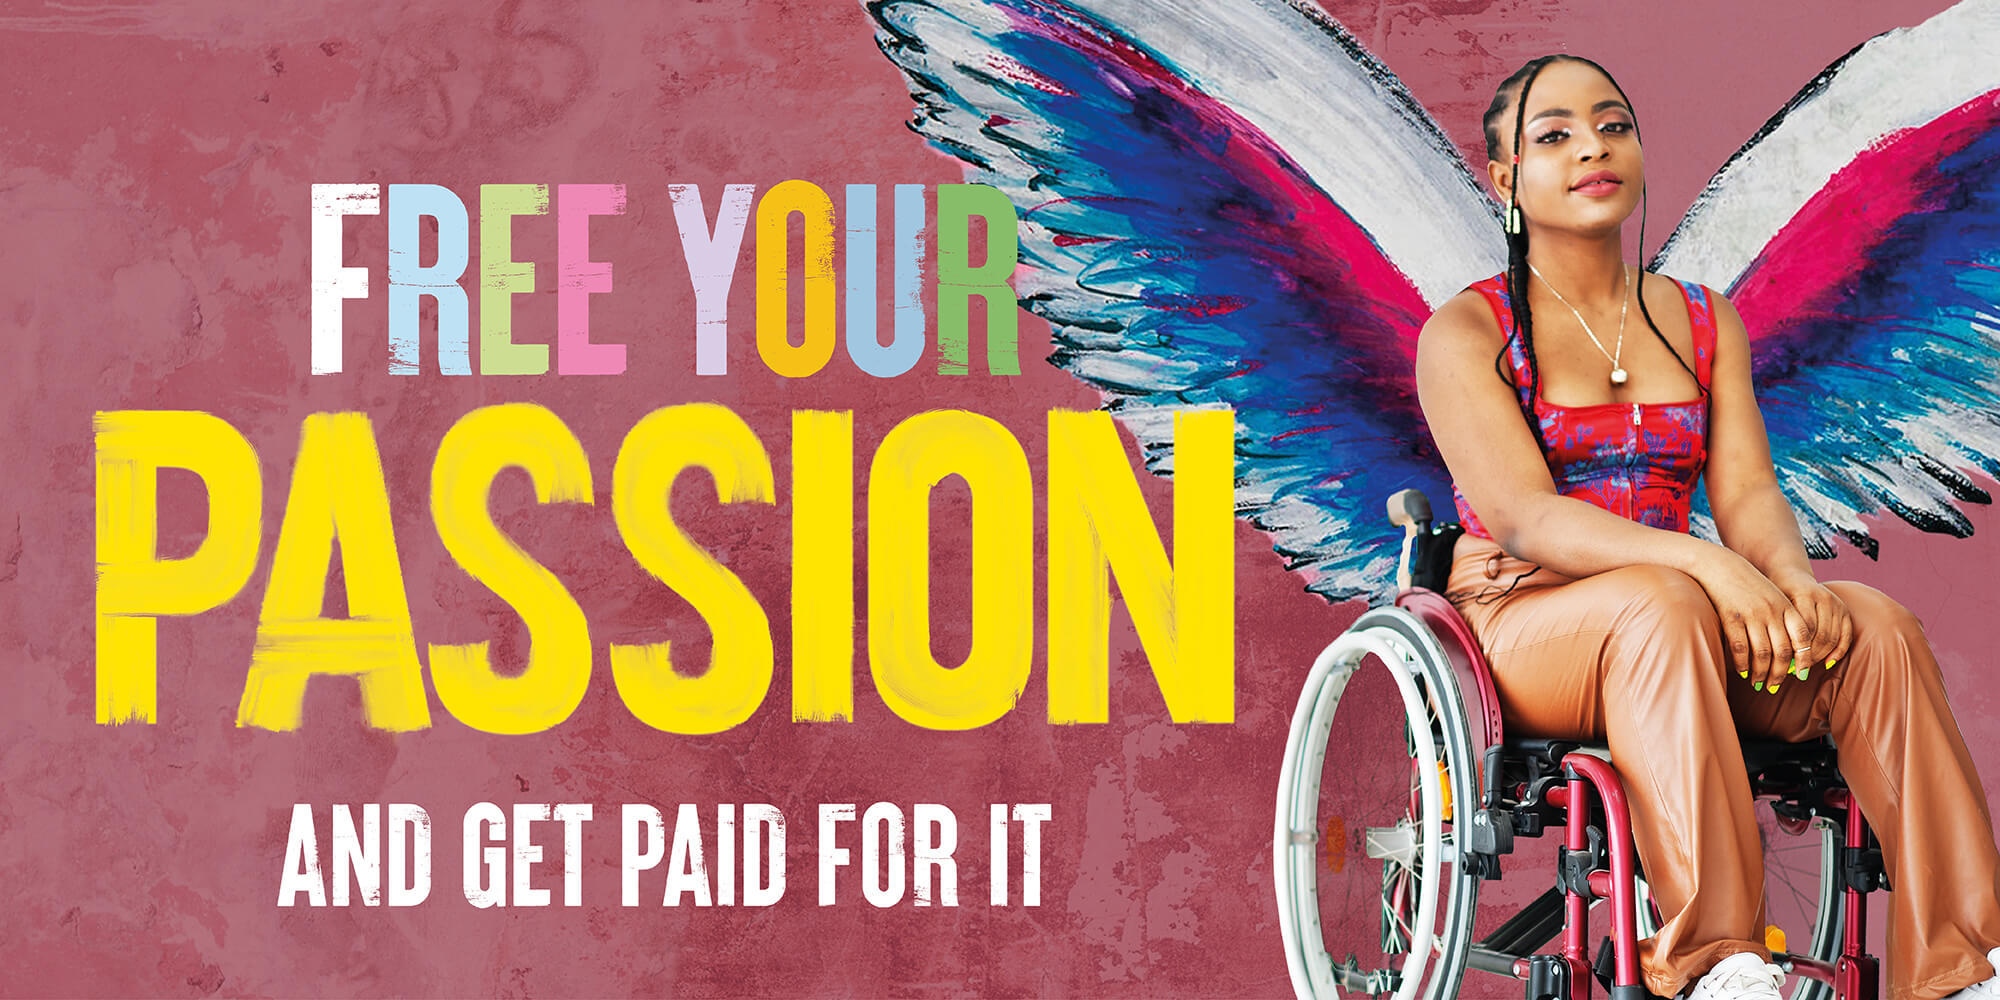 Free your passion and get paid for it banner, young girl in wheelchair